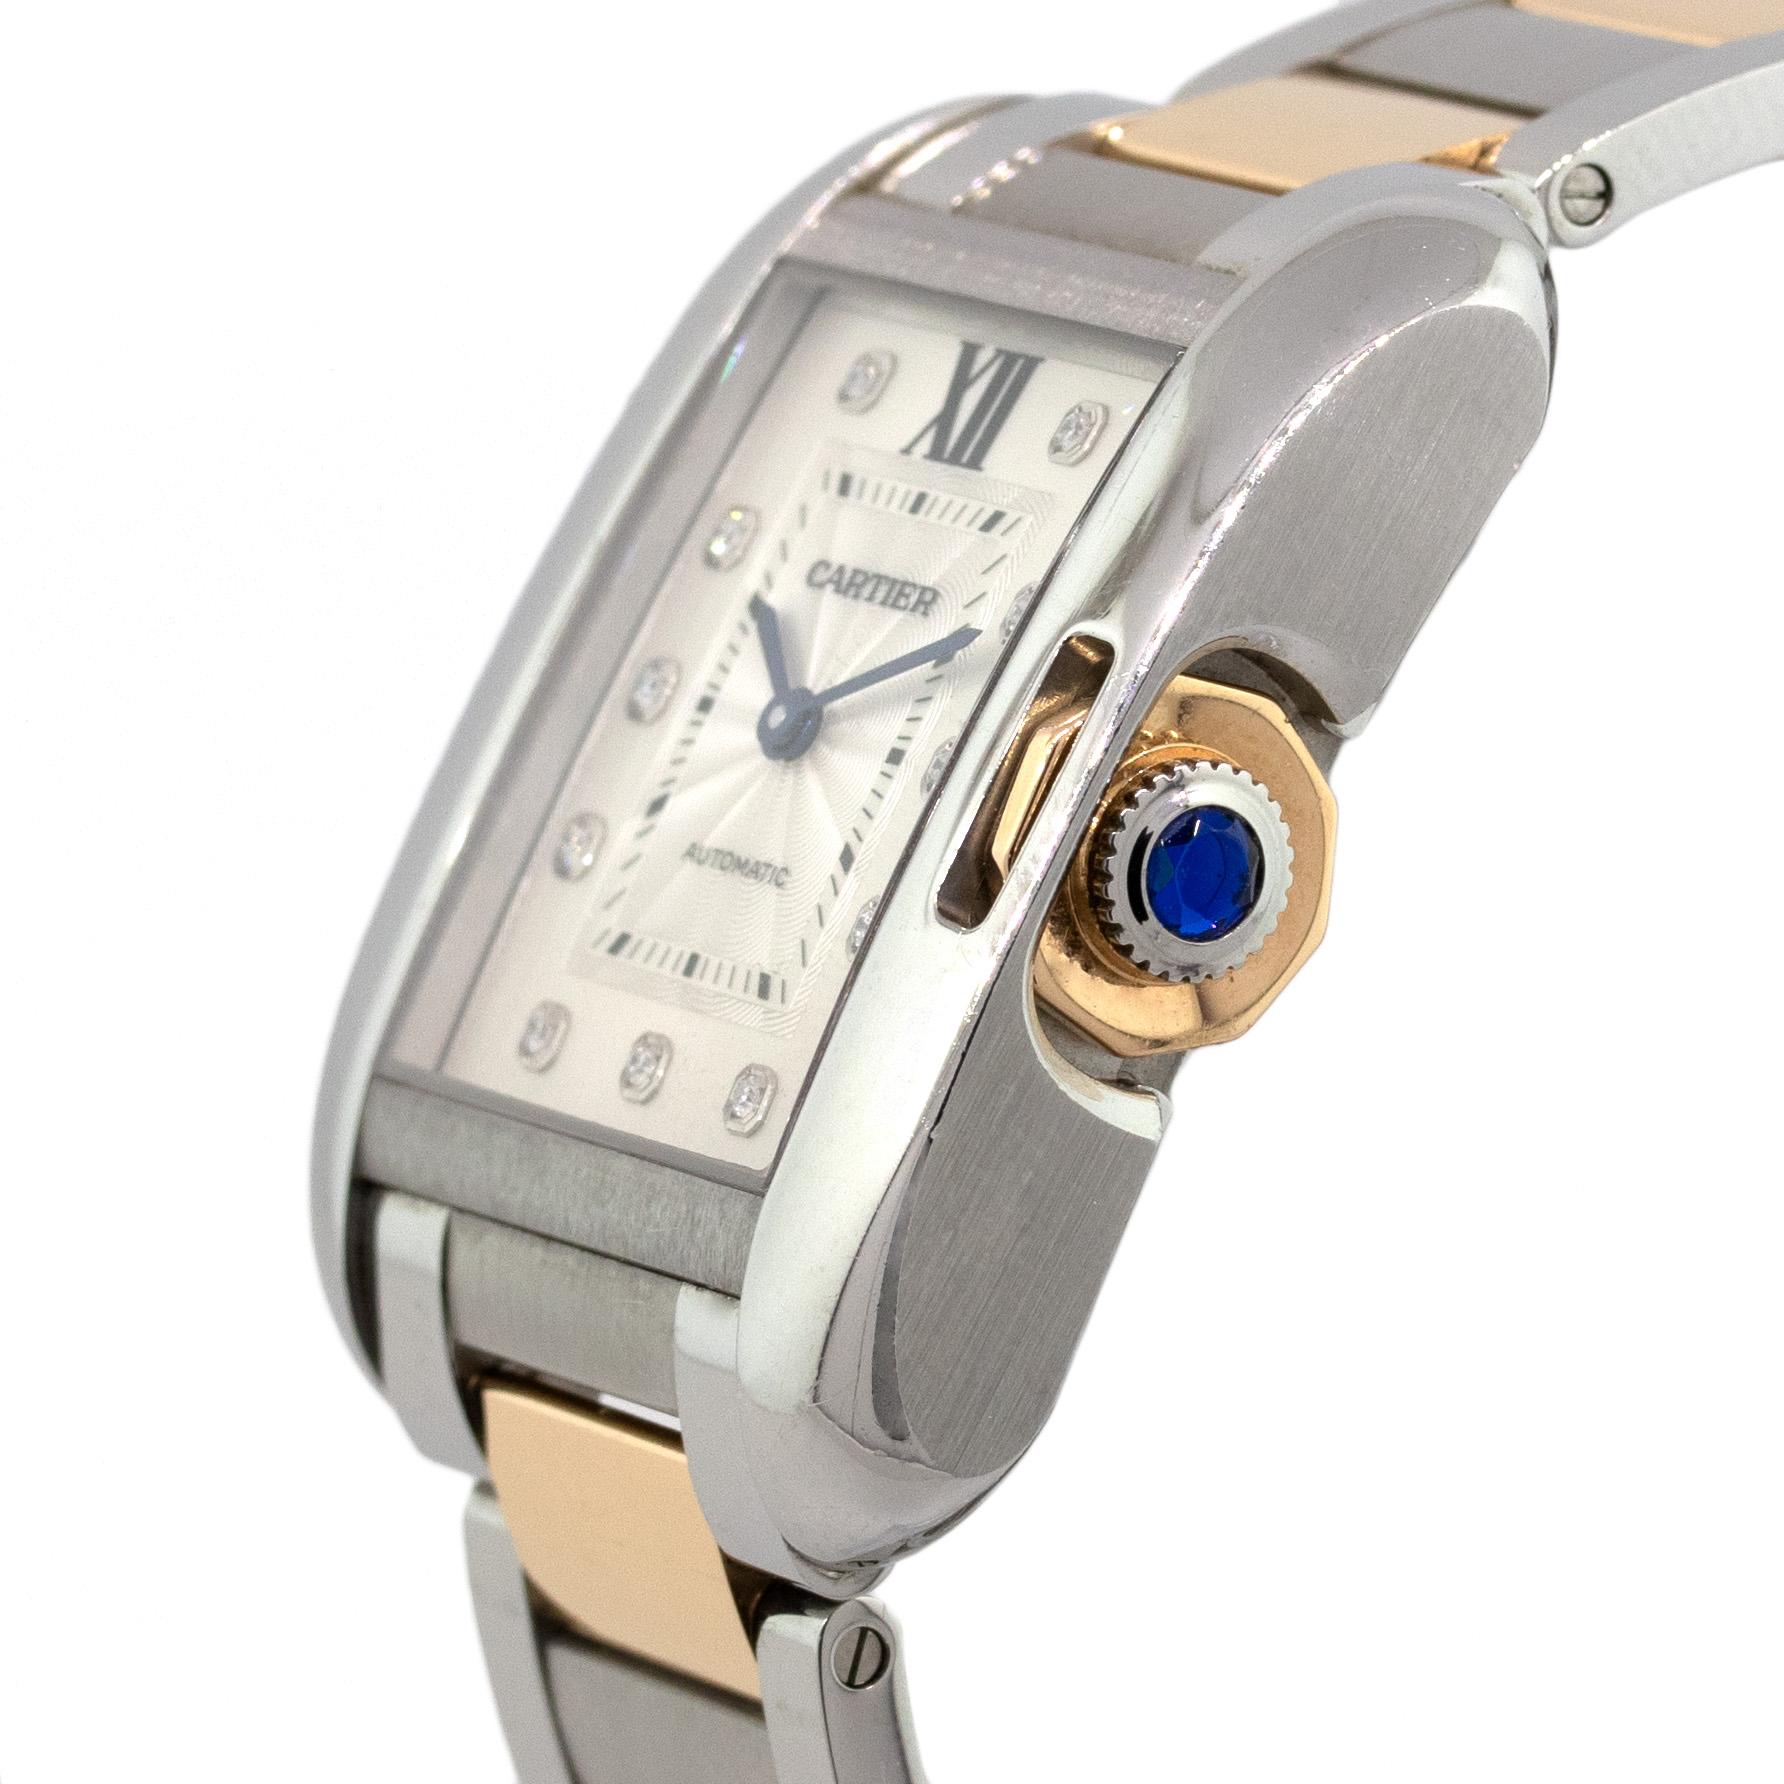 Brand: Cartier
Model: Tank
Case Material: Stainless Steel
Case Diameter: 30mm
Crystal: Scratch resistant sapphire
Bezel: Polished Stainless Steel bezel
Dial: White dial with Diamond hour markers
Bracelet: 18k Rose Gold and Stainless Steel llink